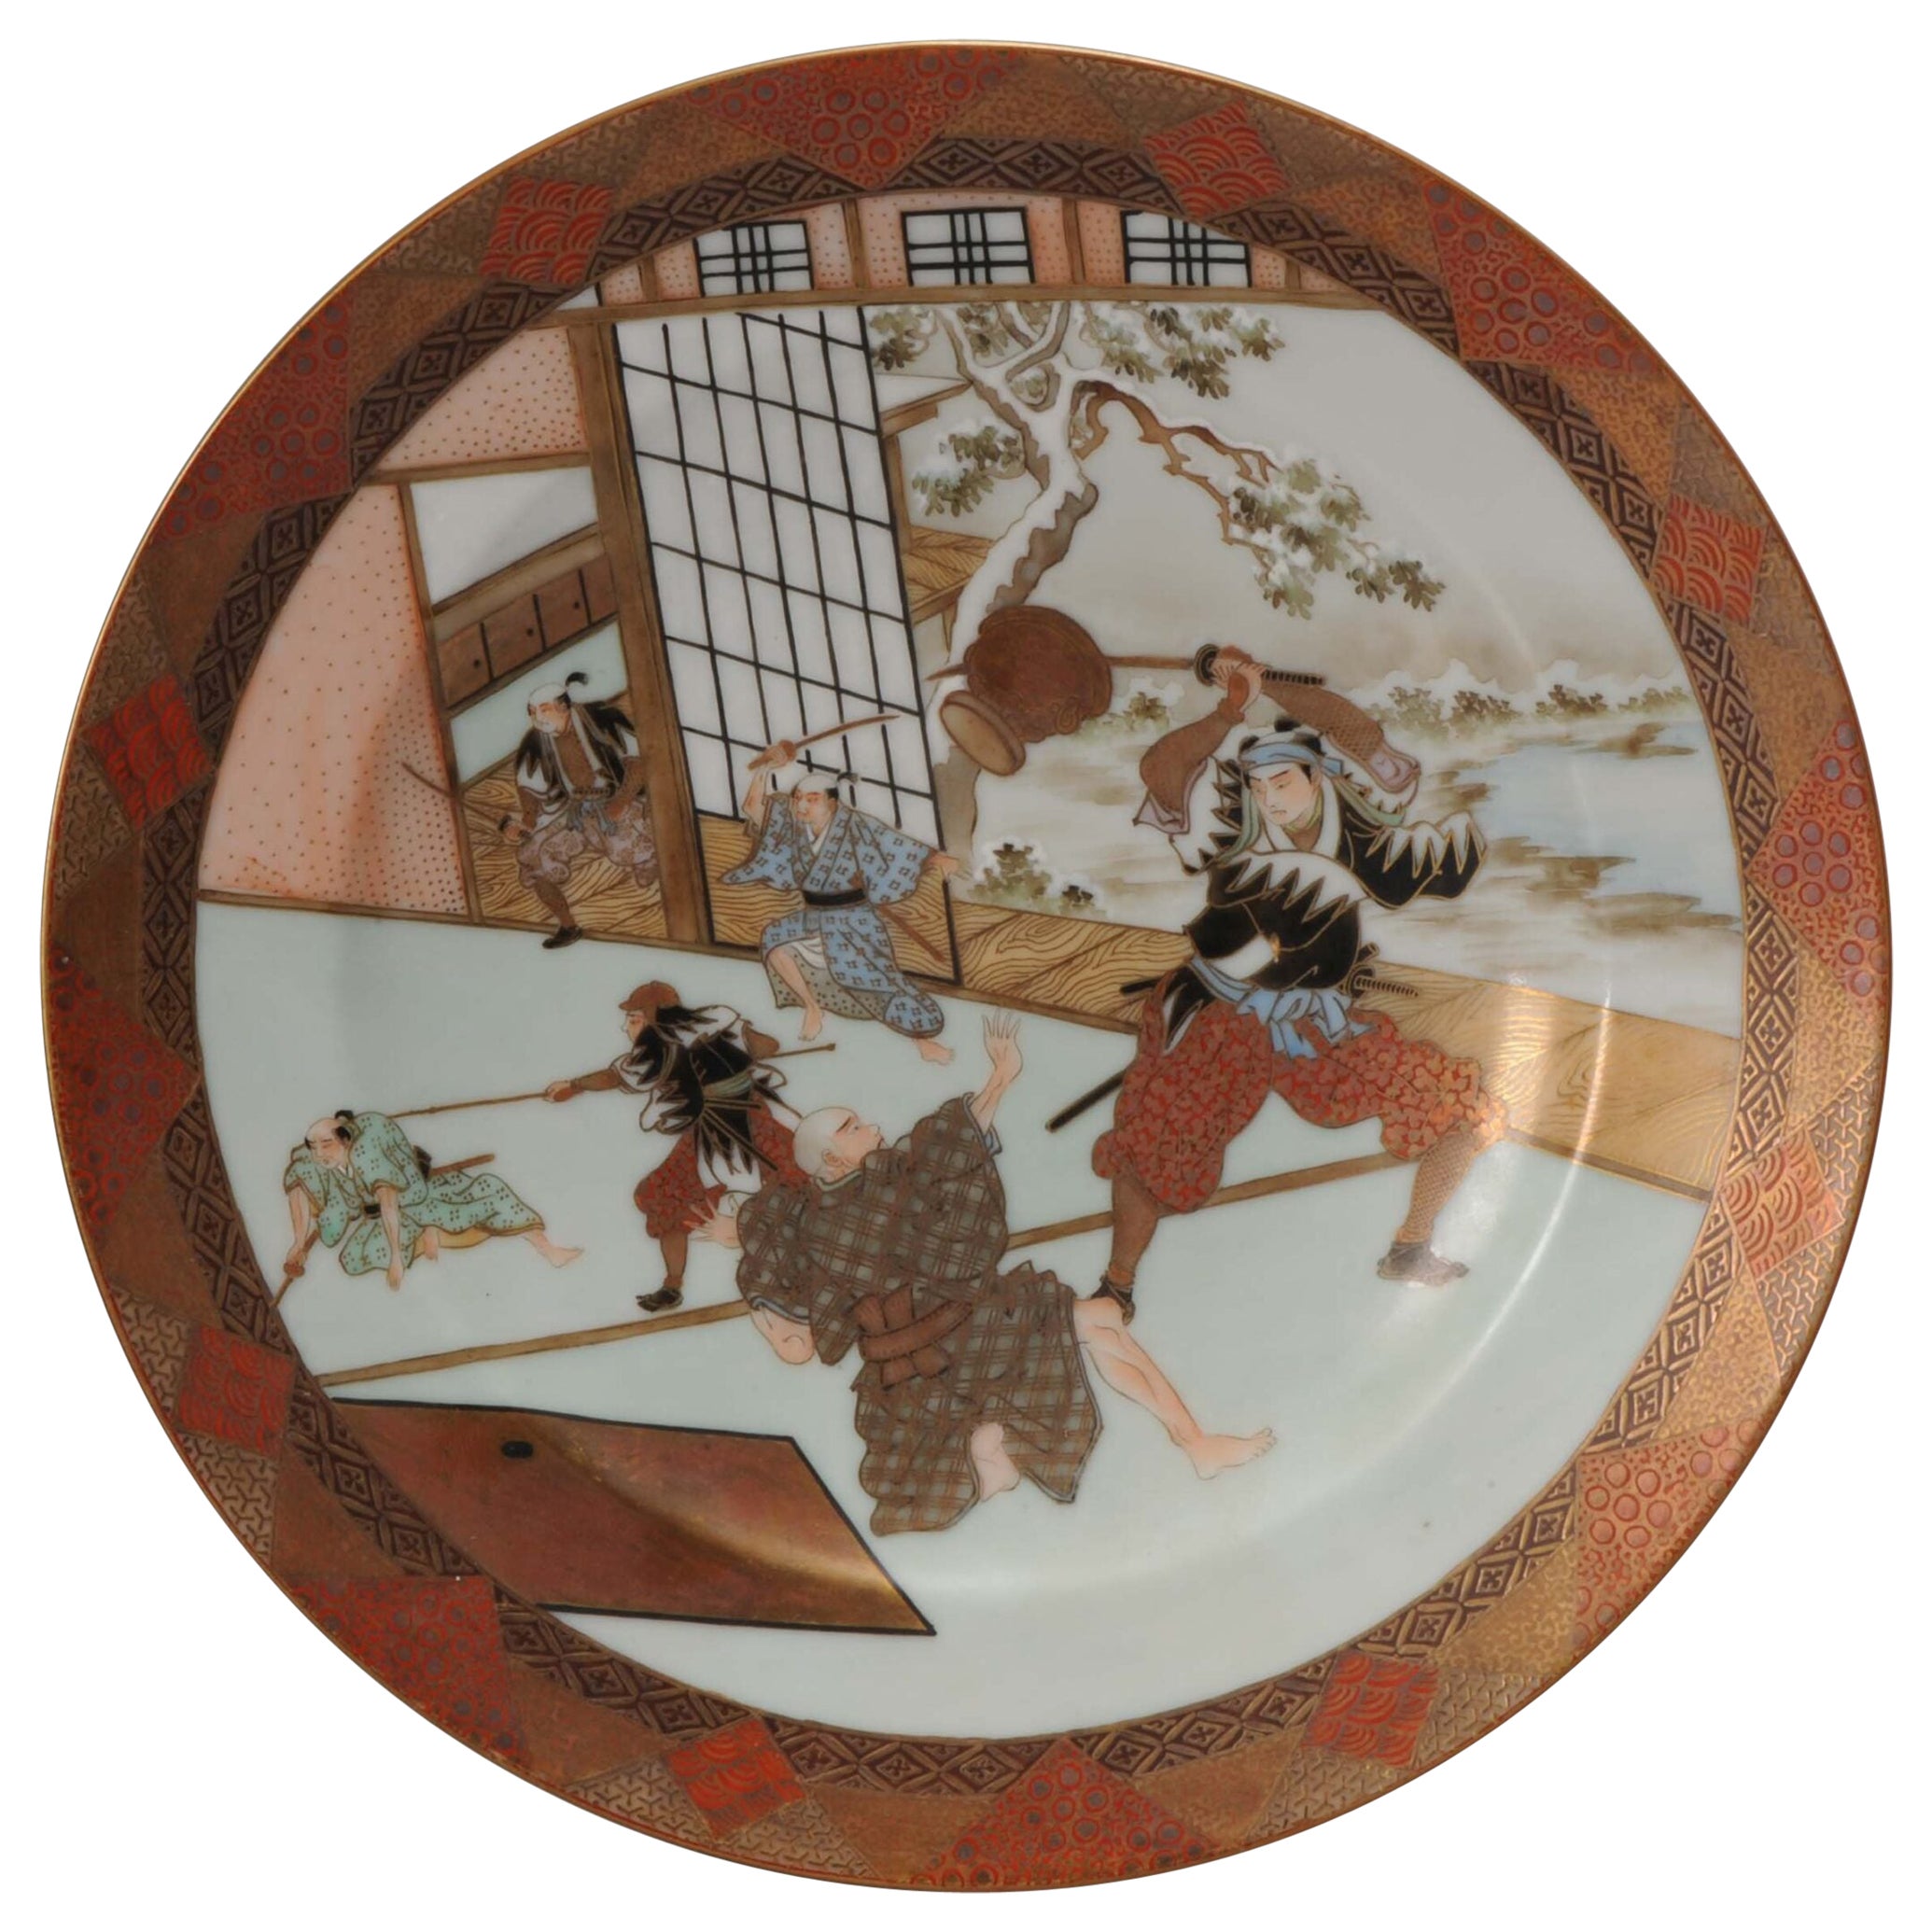 Top Quality Antique Japanese Porcelain Dish with Warrior Scene Japan Marked Base For Sale